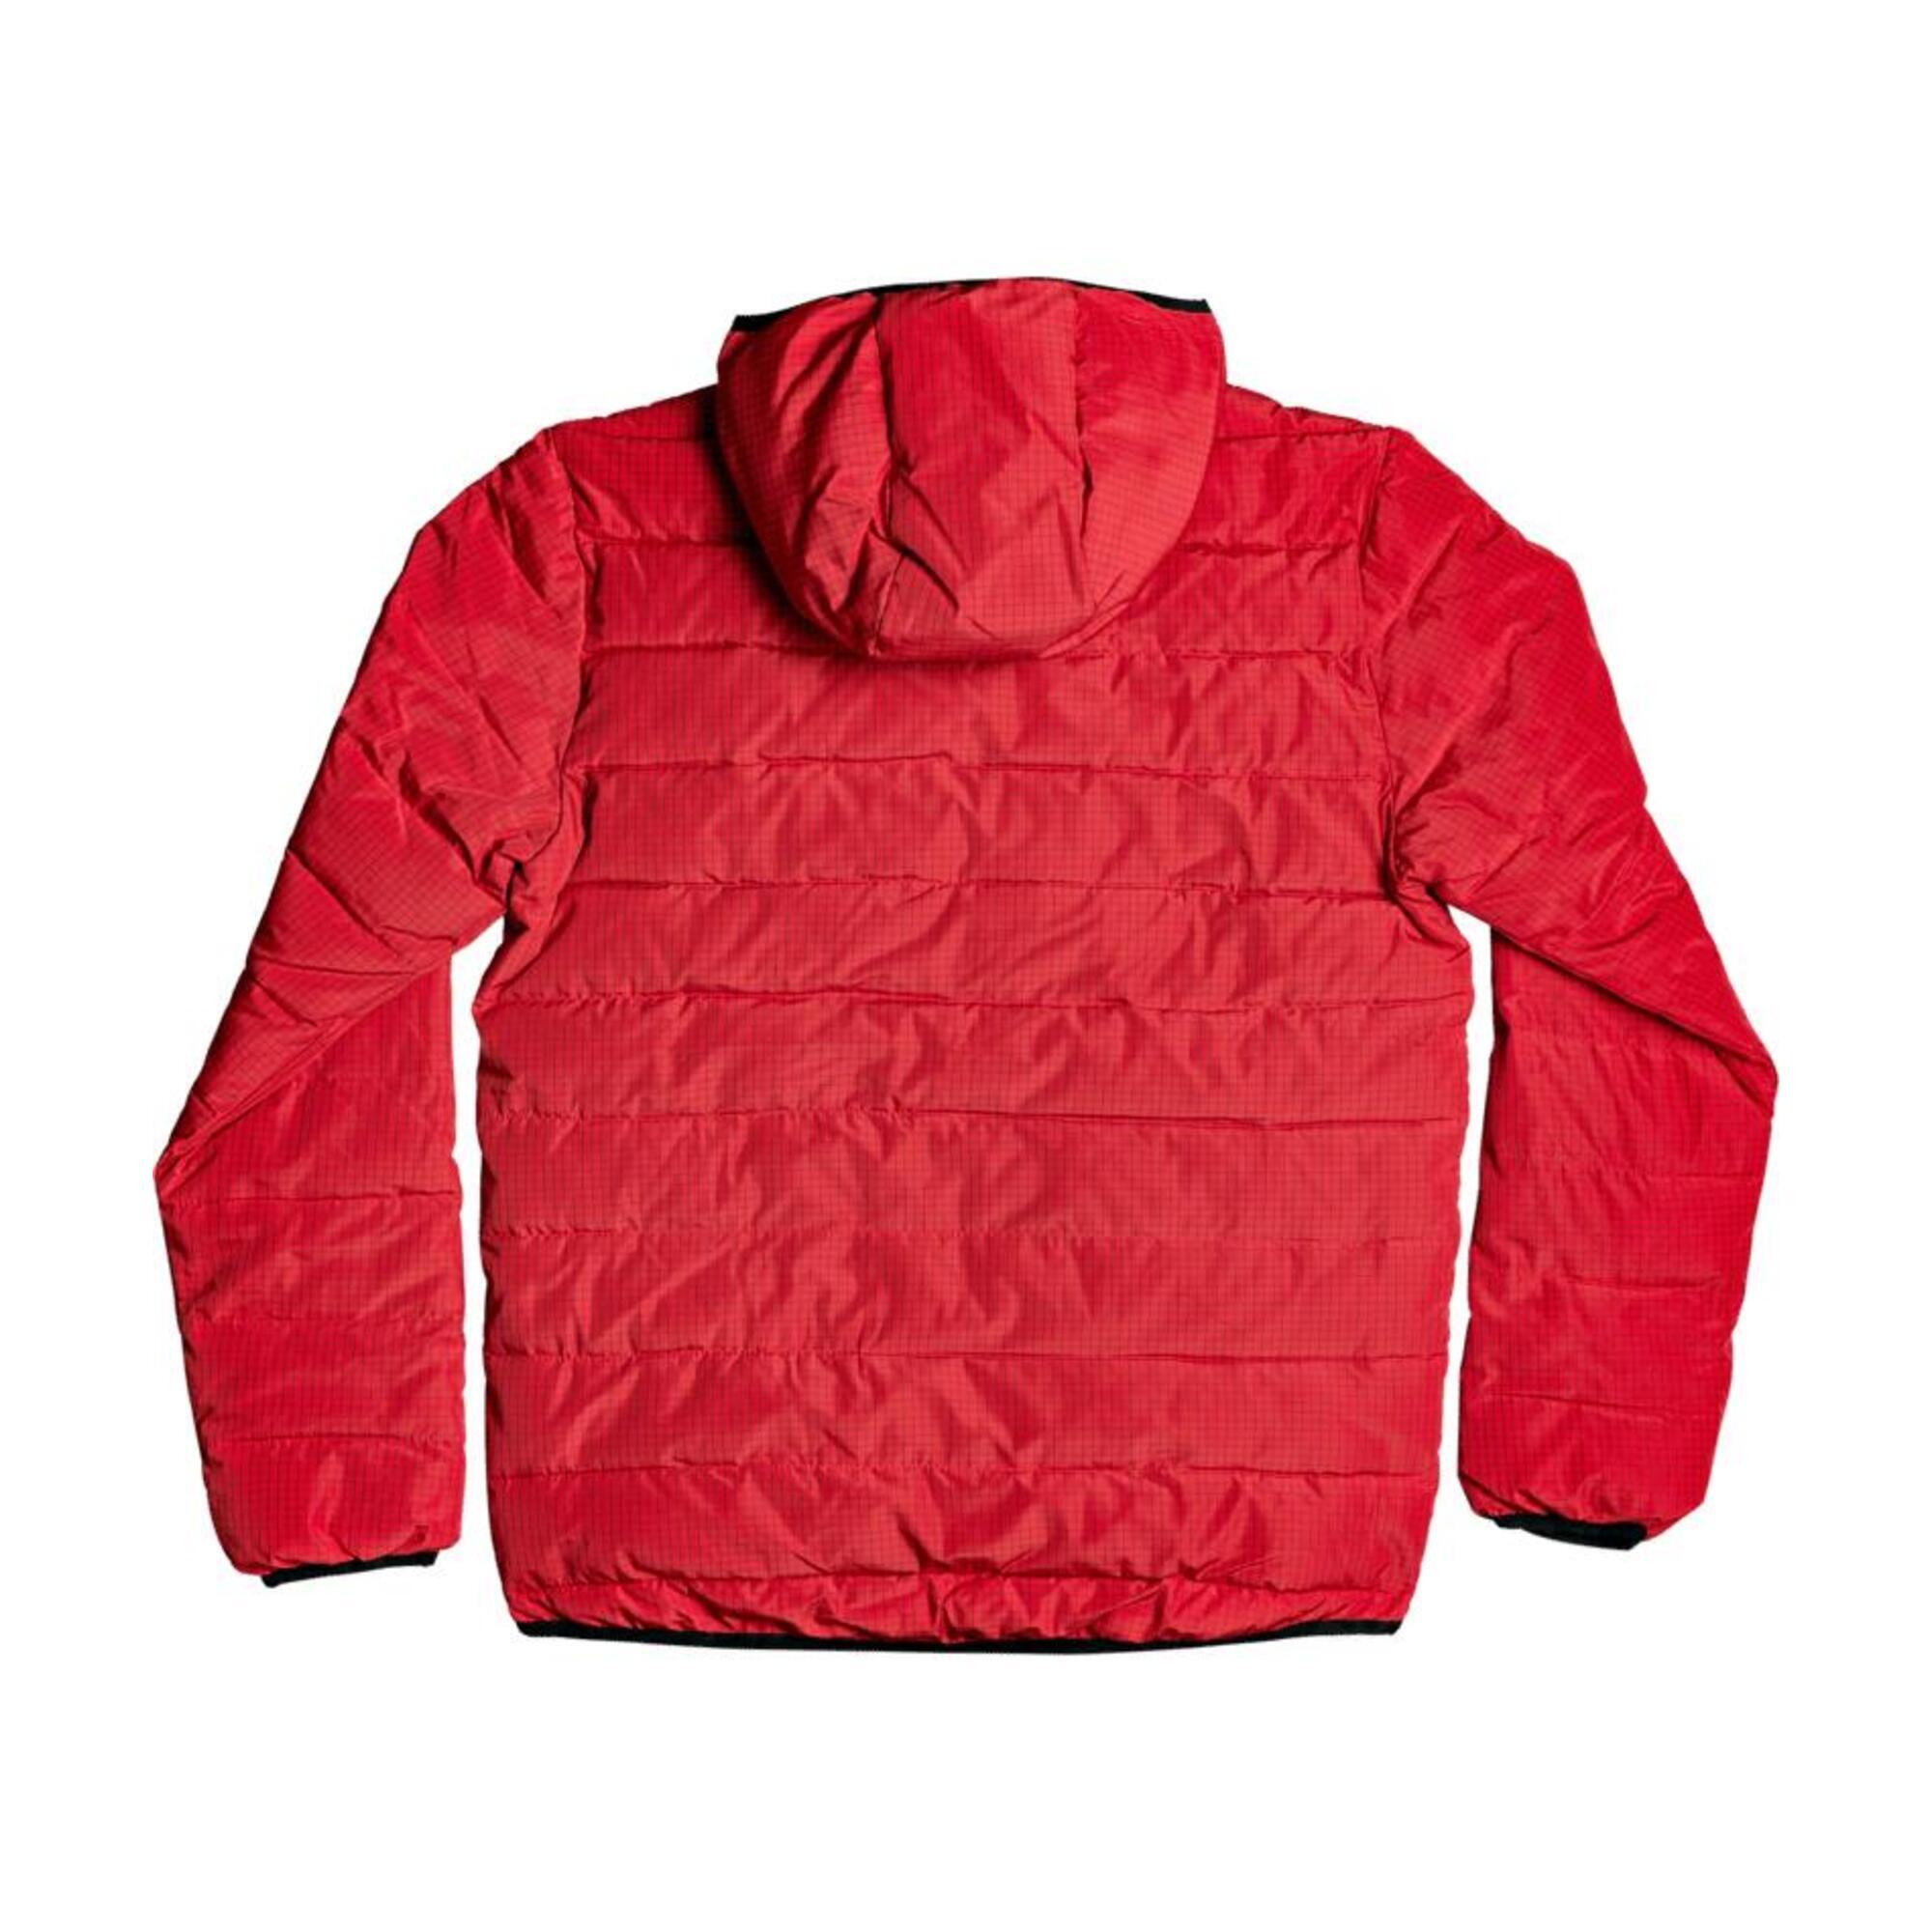 DC Shoes Turner Puffer Hooded, Rojo, XL